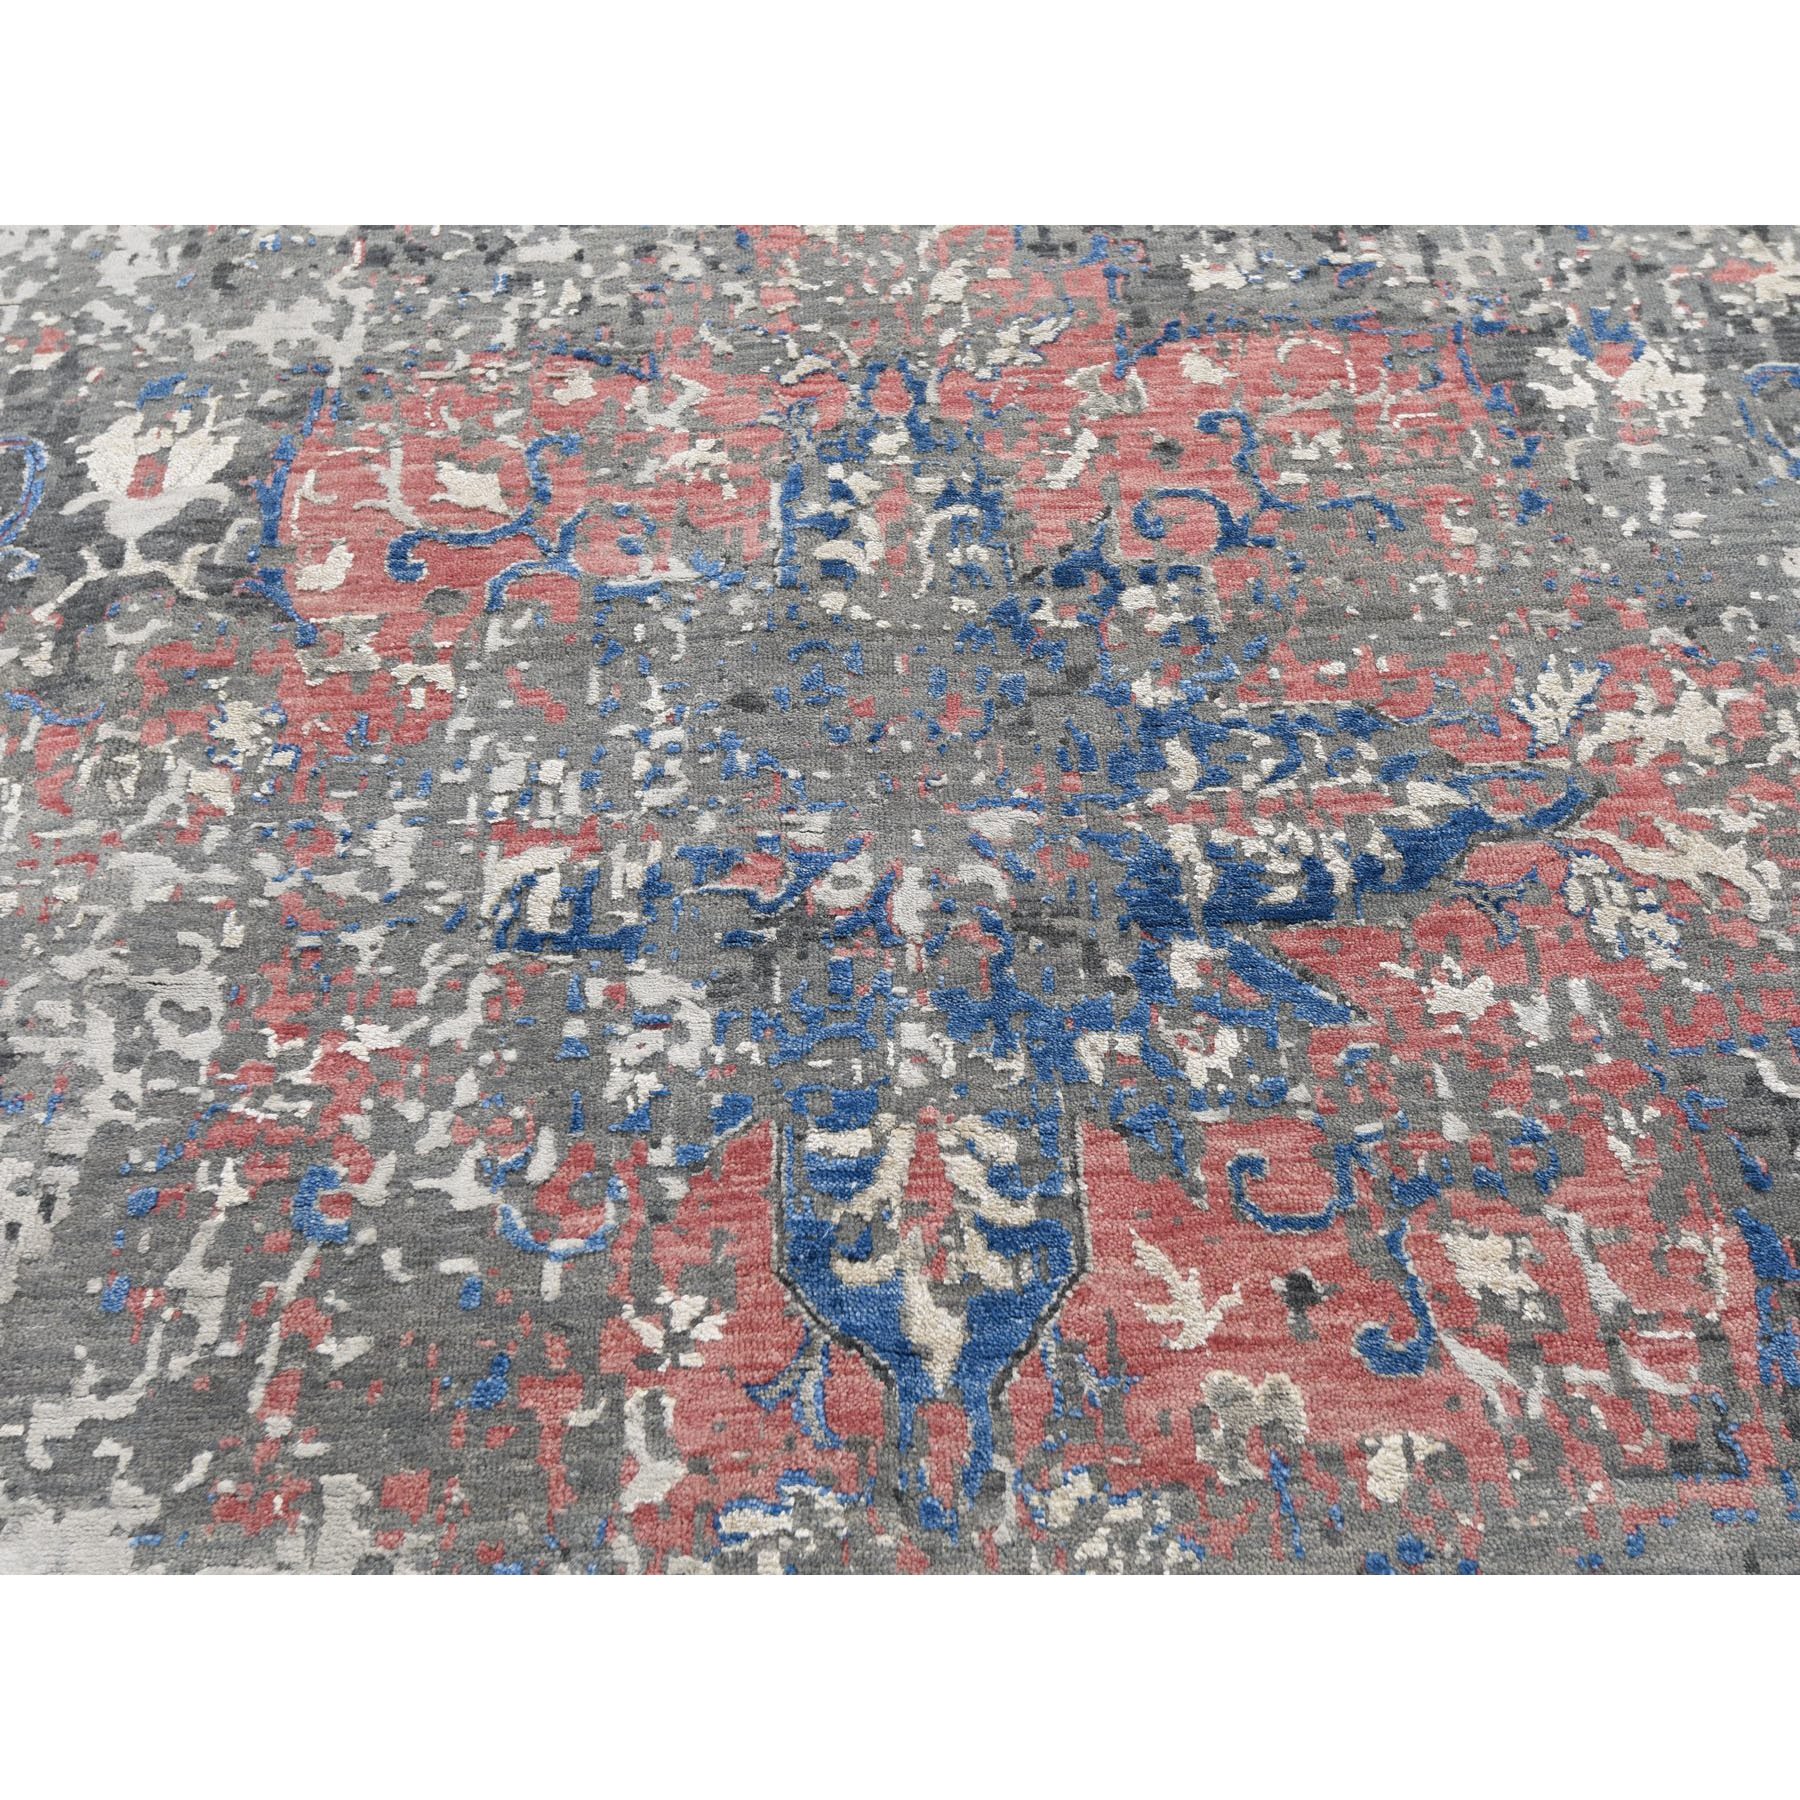 9-2 x12- Gray Wool And Silk Broken Persian Design Hand Knotted Oriental Rug 